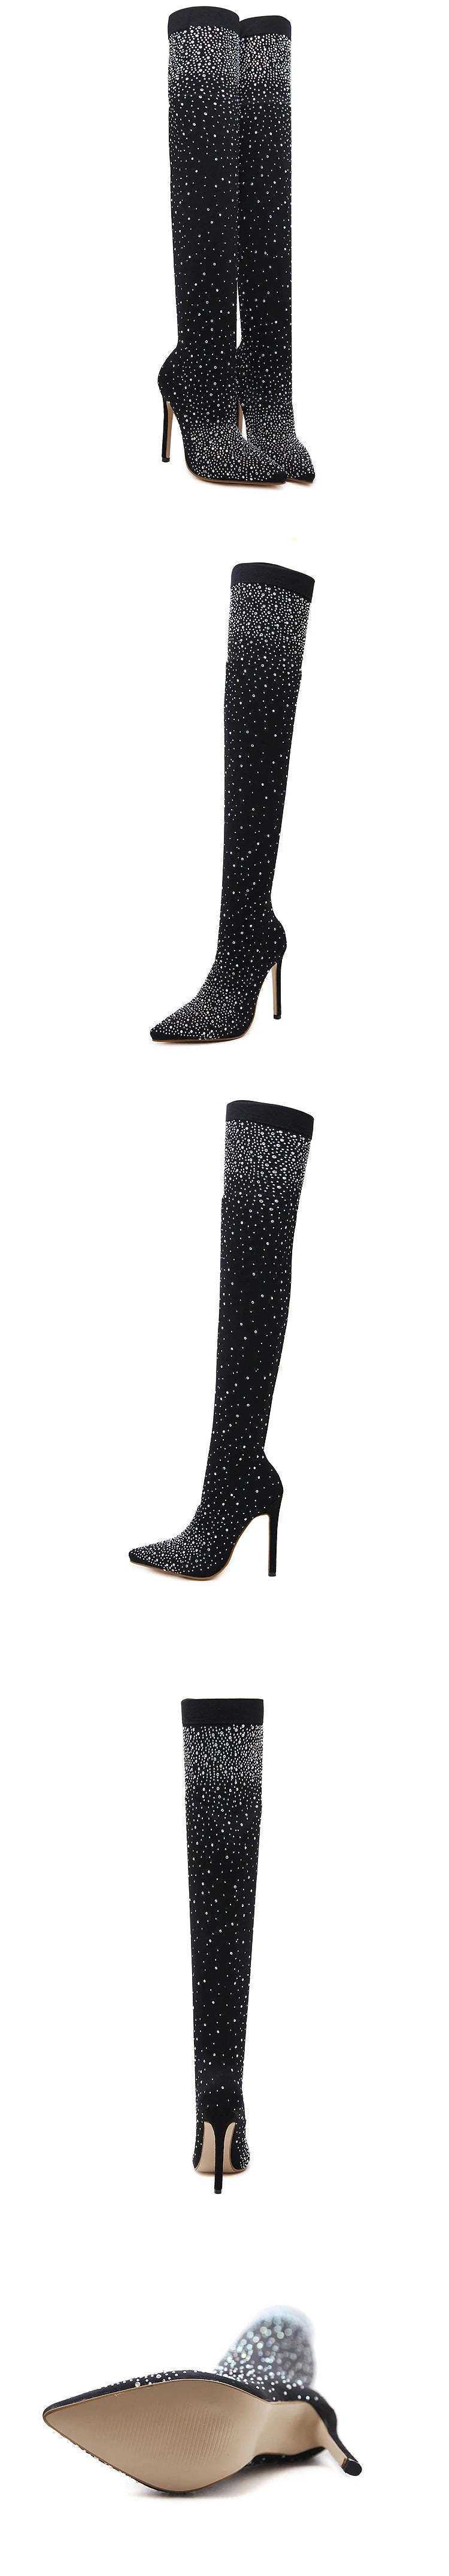 Design Crystal Rhinestone Stretch Fabric Sexy High Heels Sock Over-the-Knee Boots Pointed Toe Pole Dancing Women Shoes